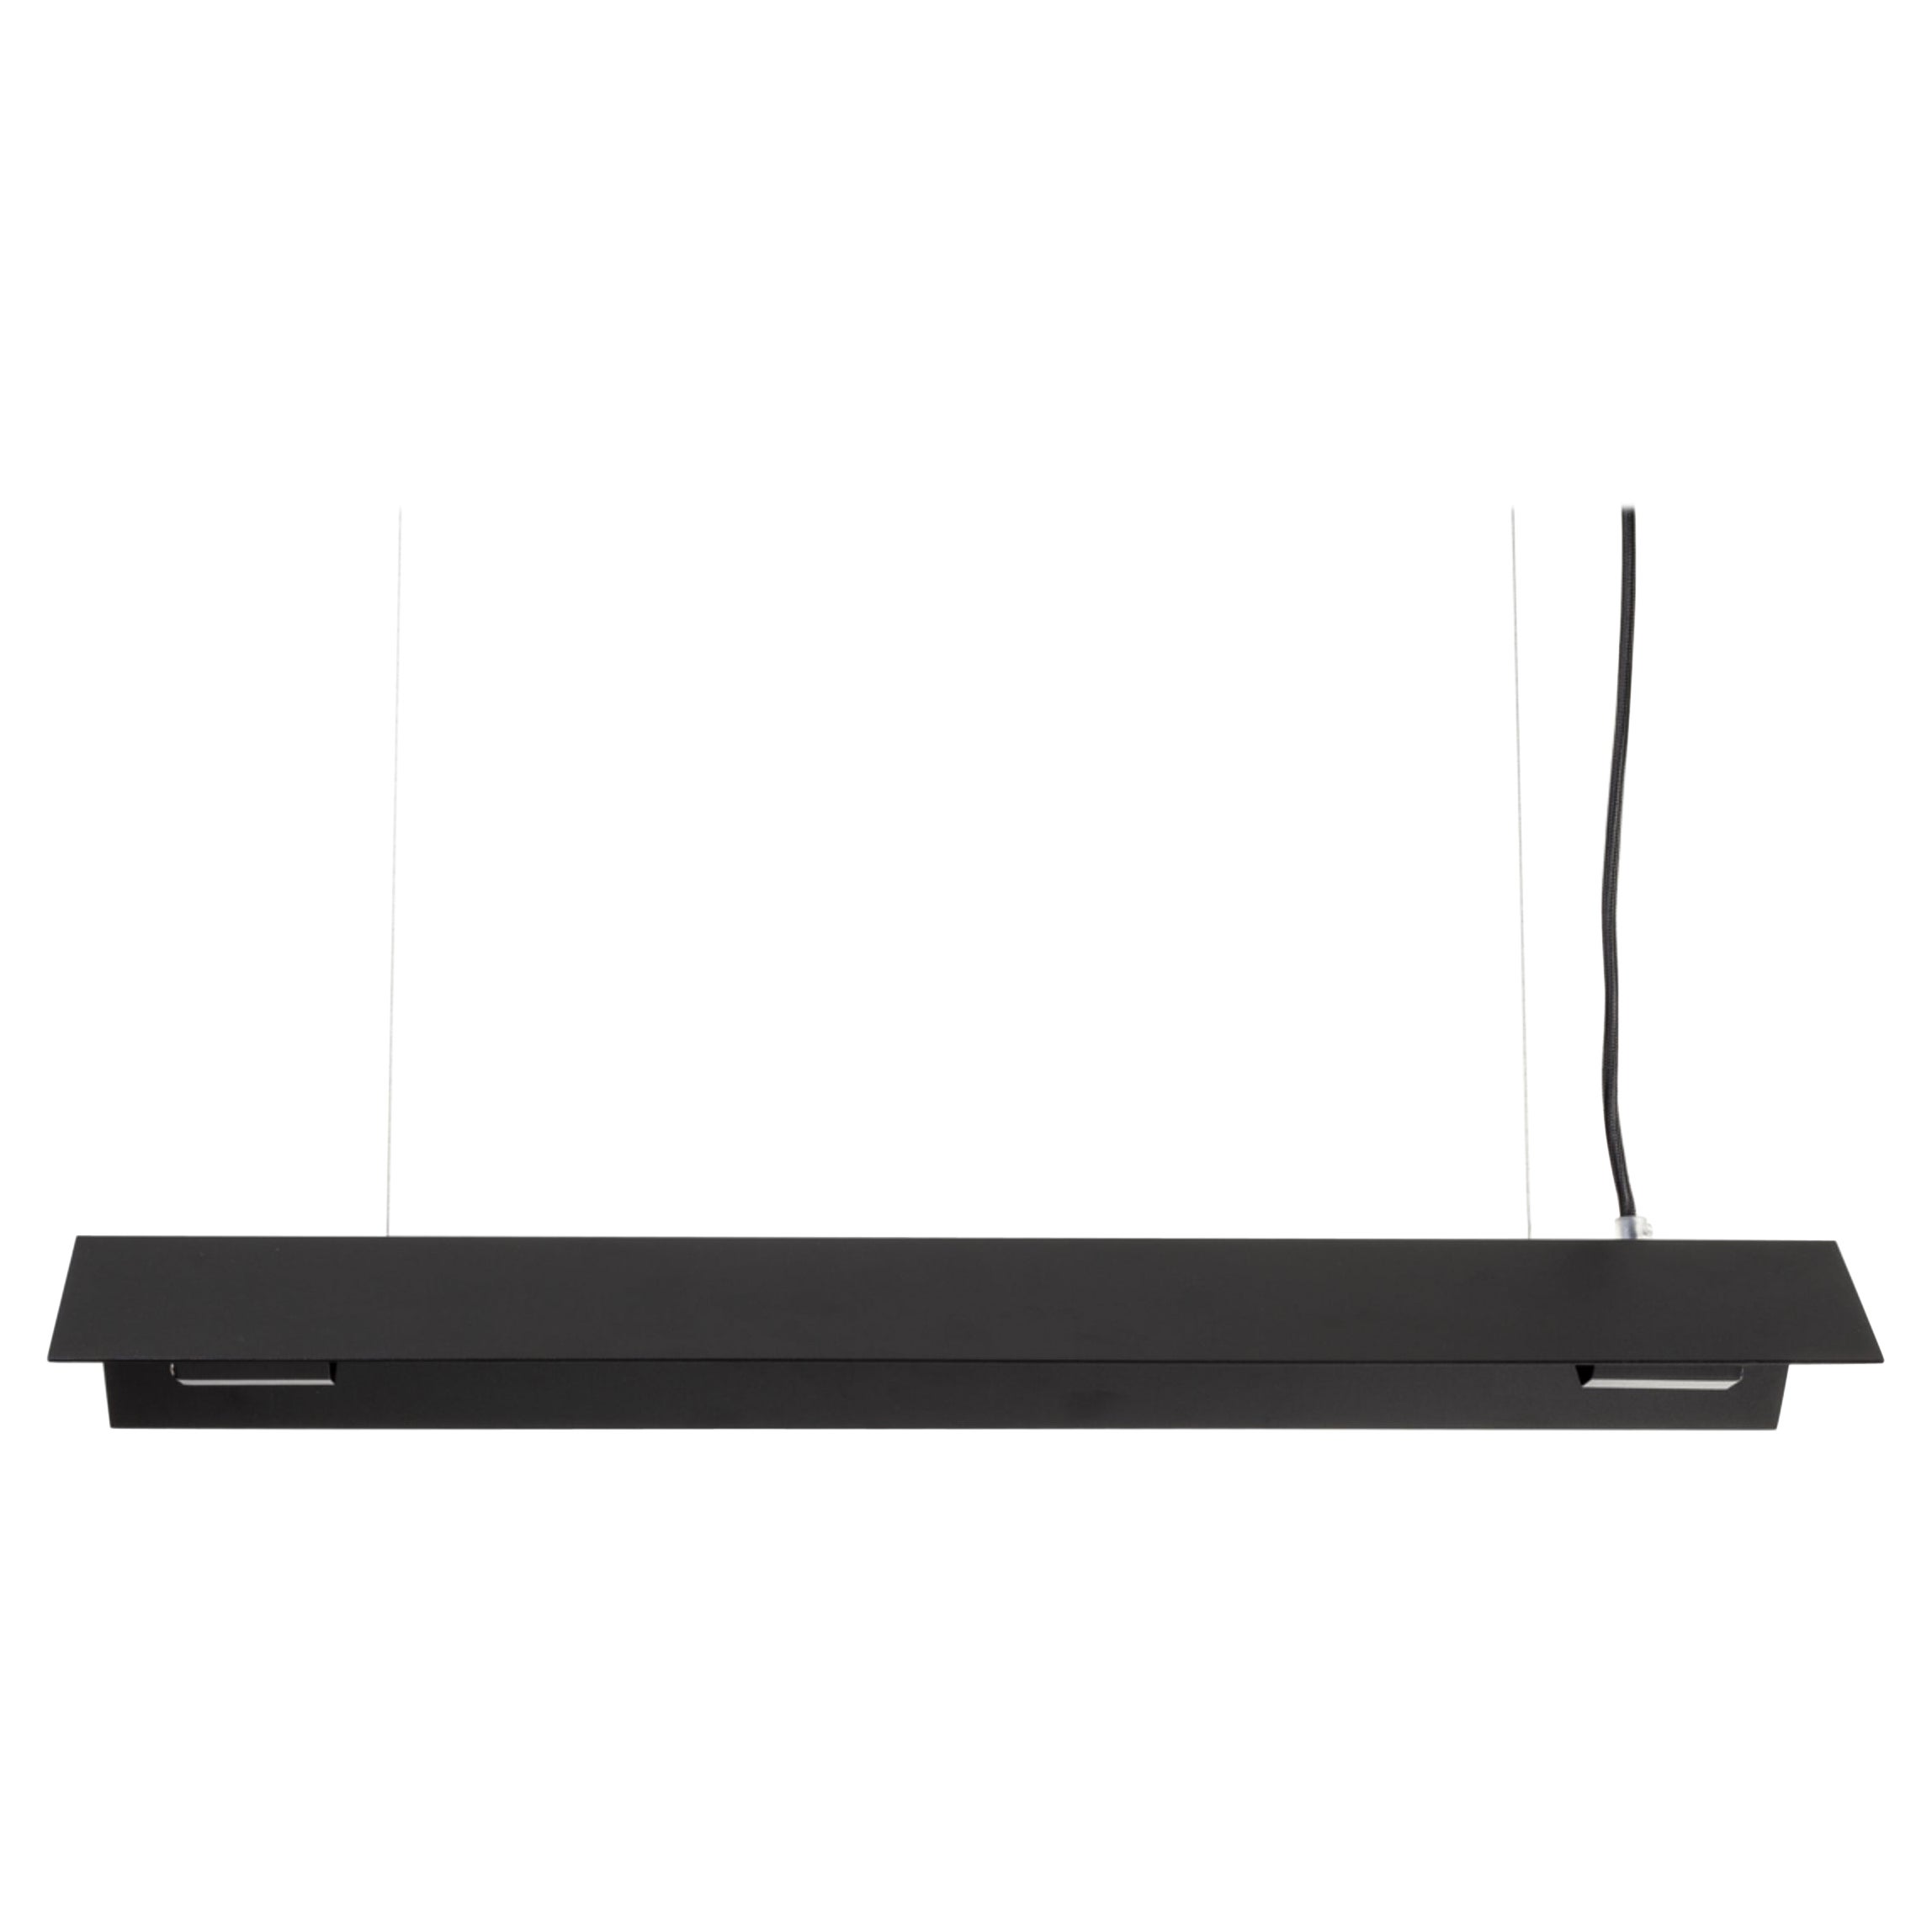 Small Misalliance Ral Jet Black Suspended Light by Lexavala For Sale